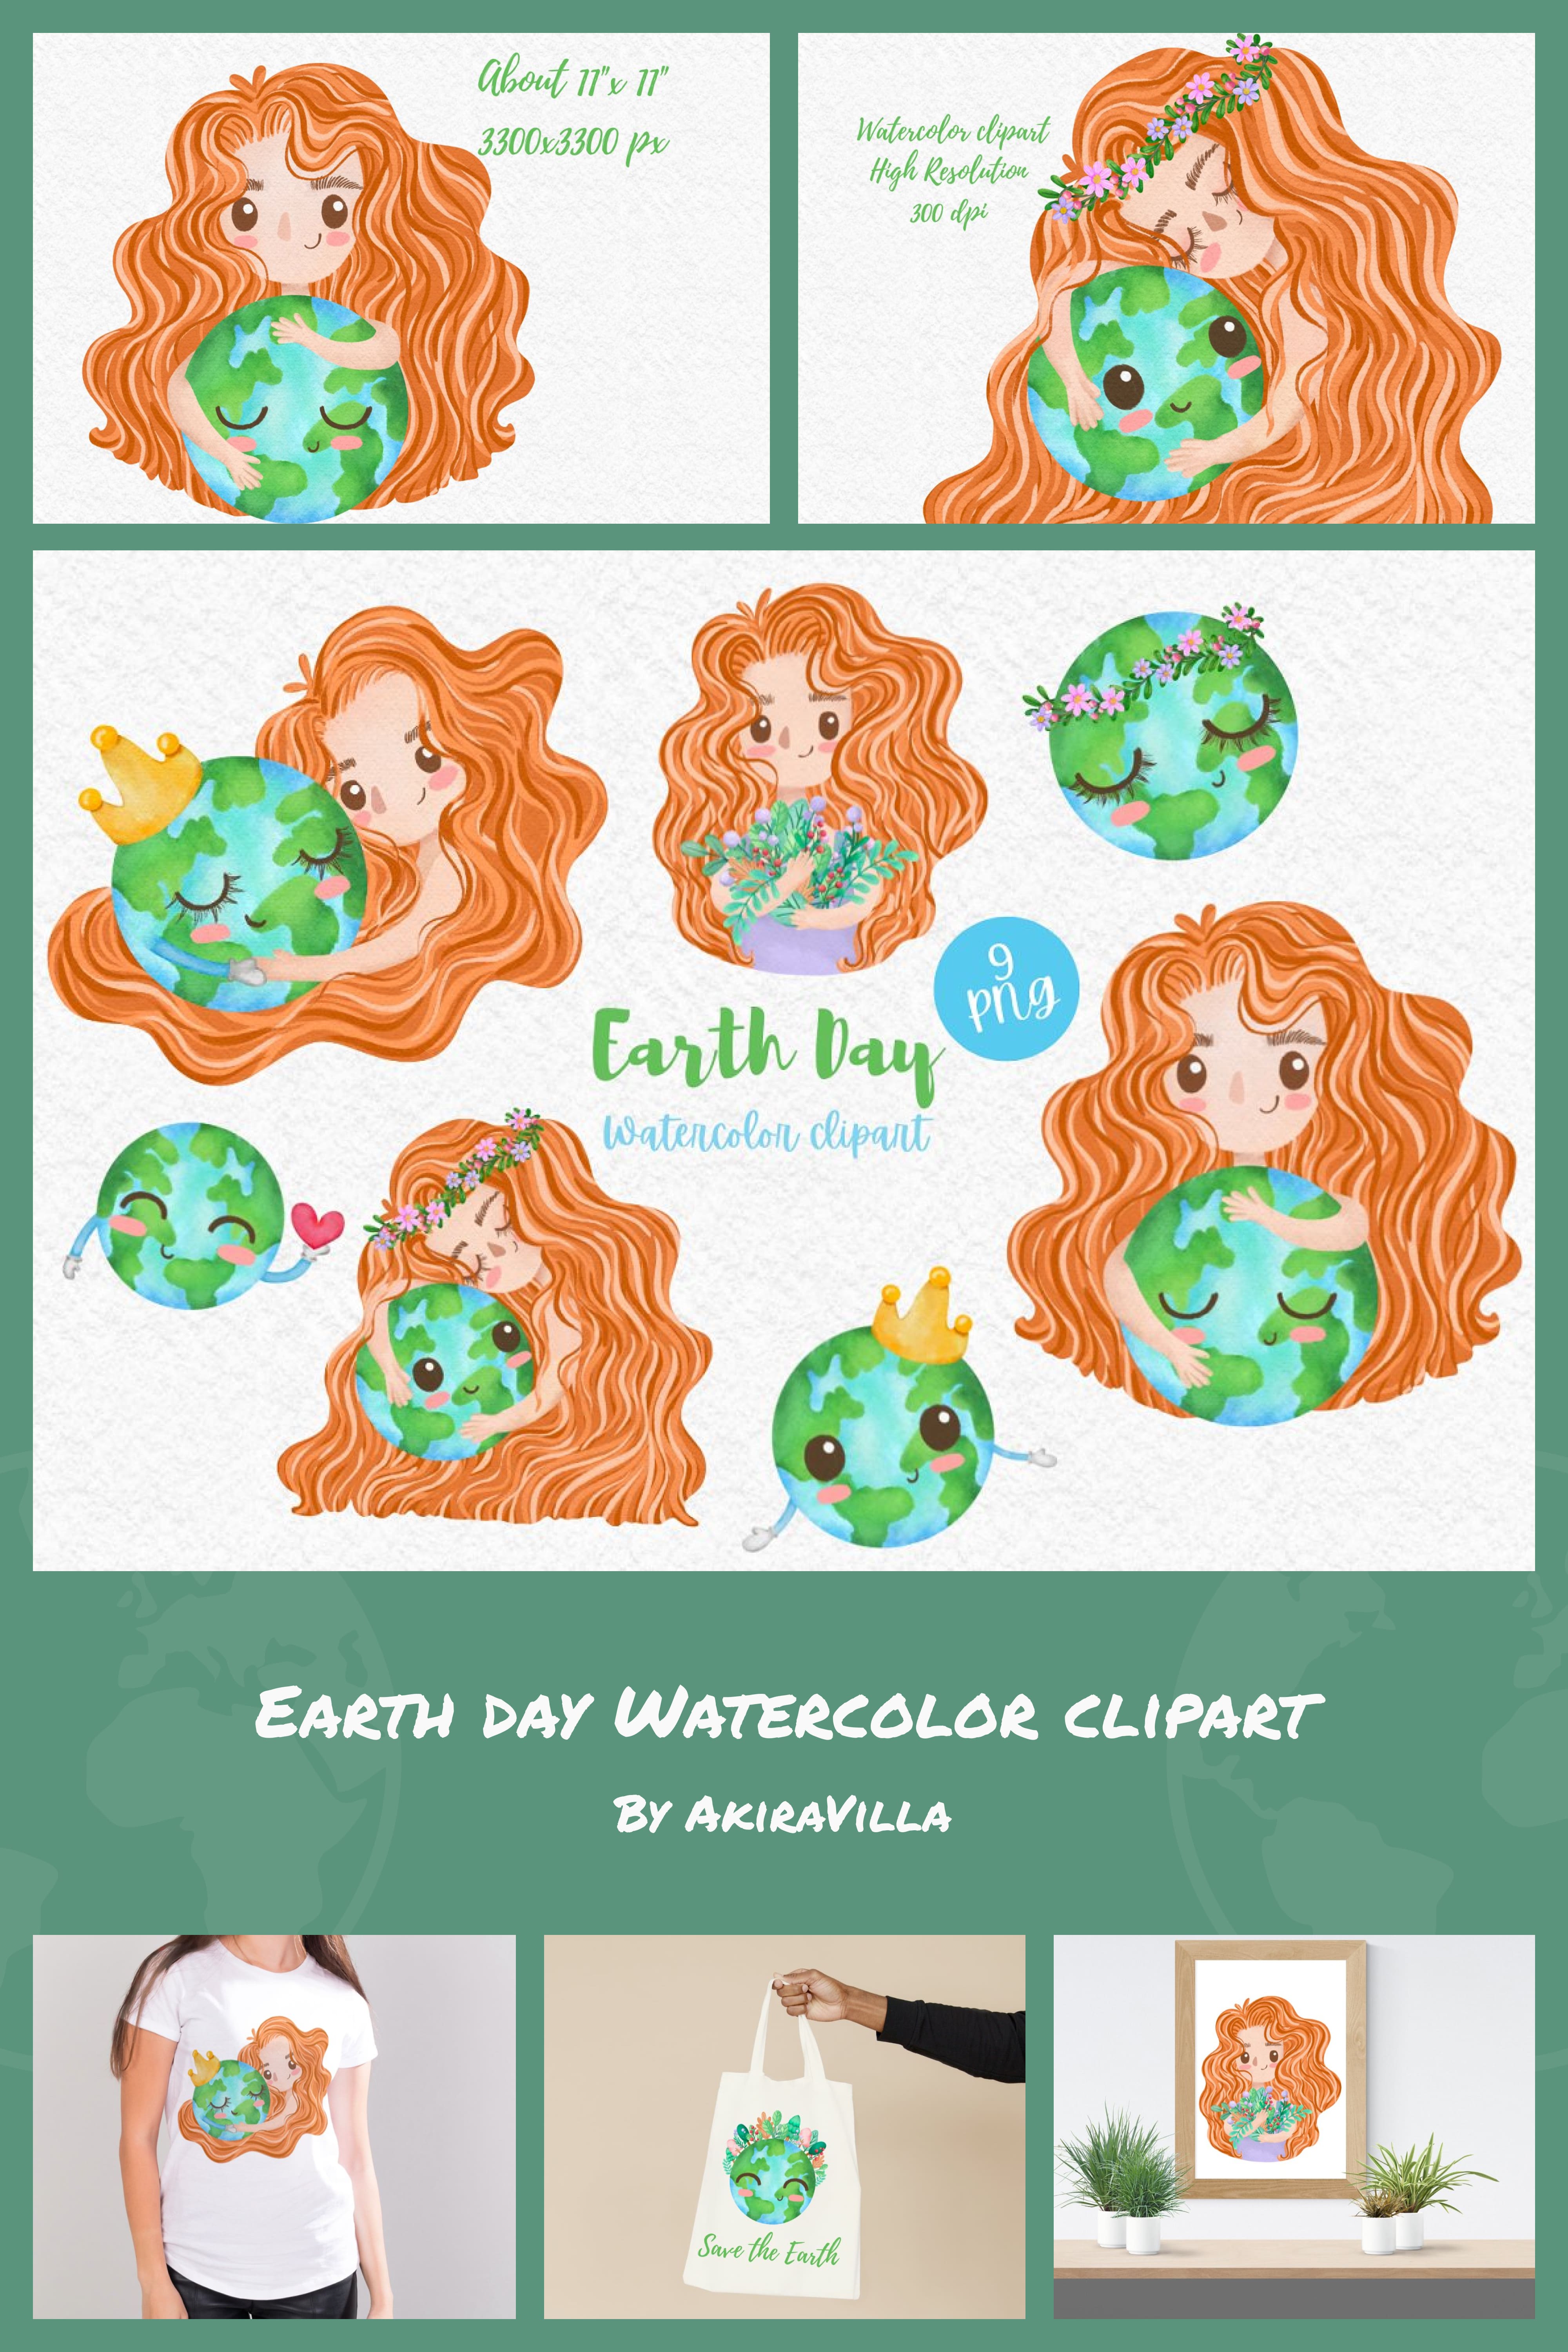 earth day watercolor clipart 03 545